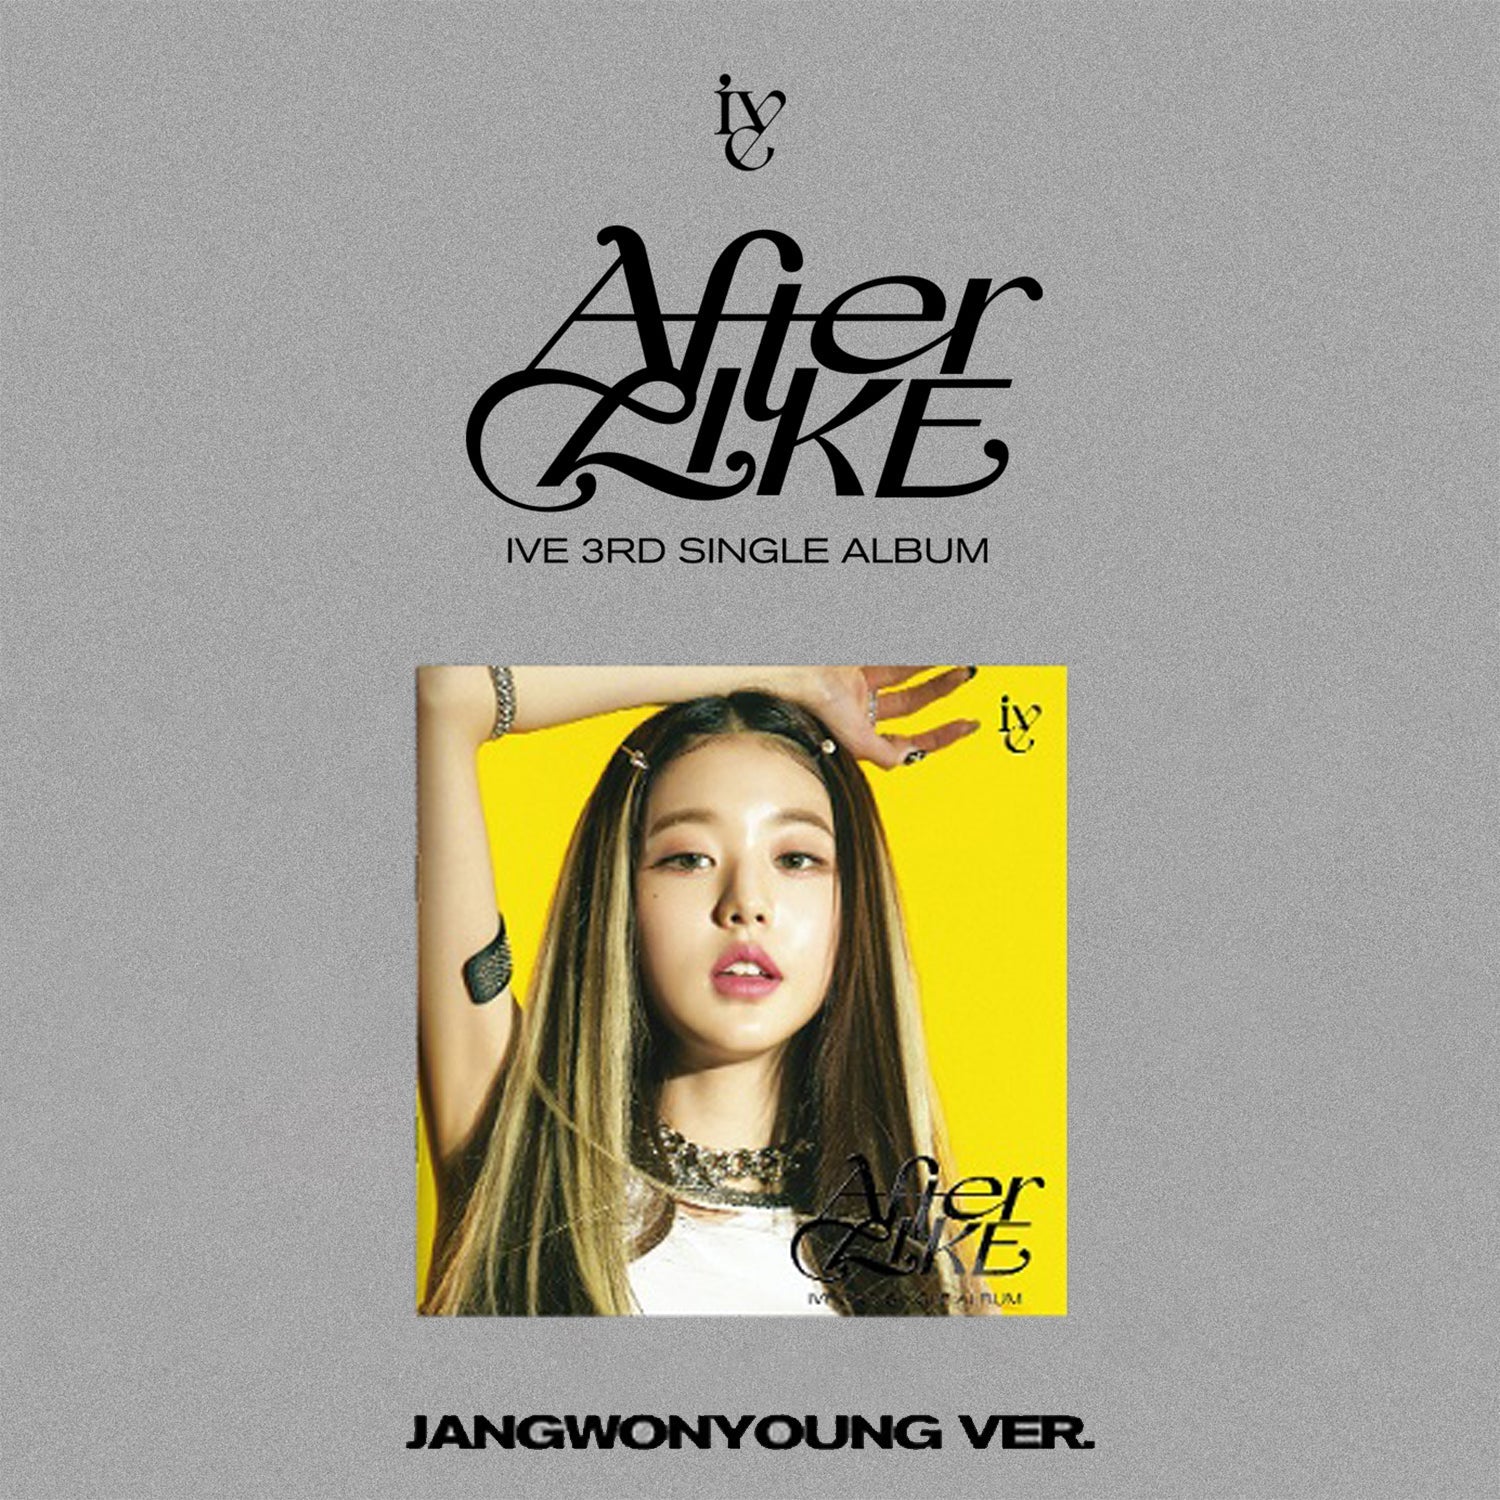 IVE 3RD SINGLE ALBUM 'AFTER LIKE' (JEWEL) JANGWONYOUNG VERSION COVER